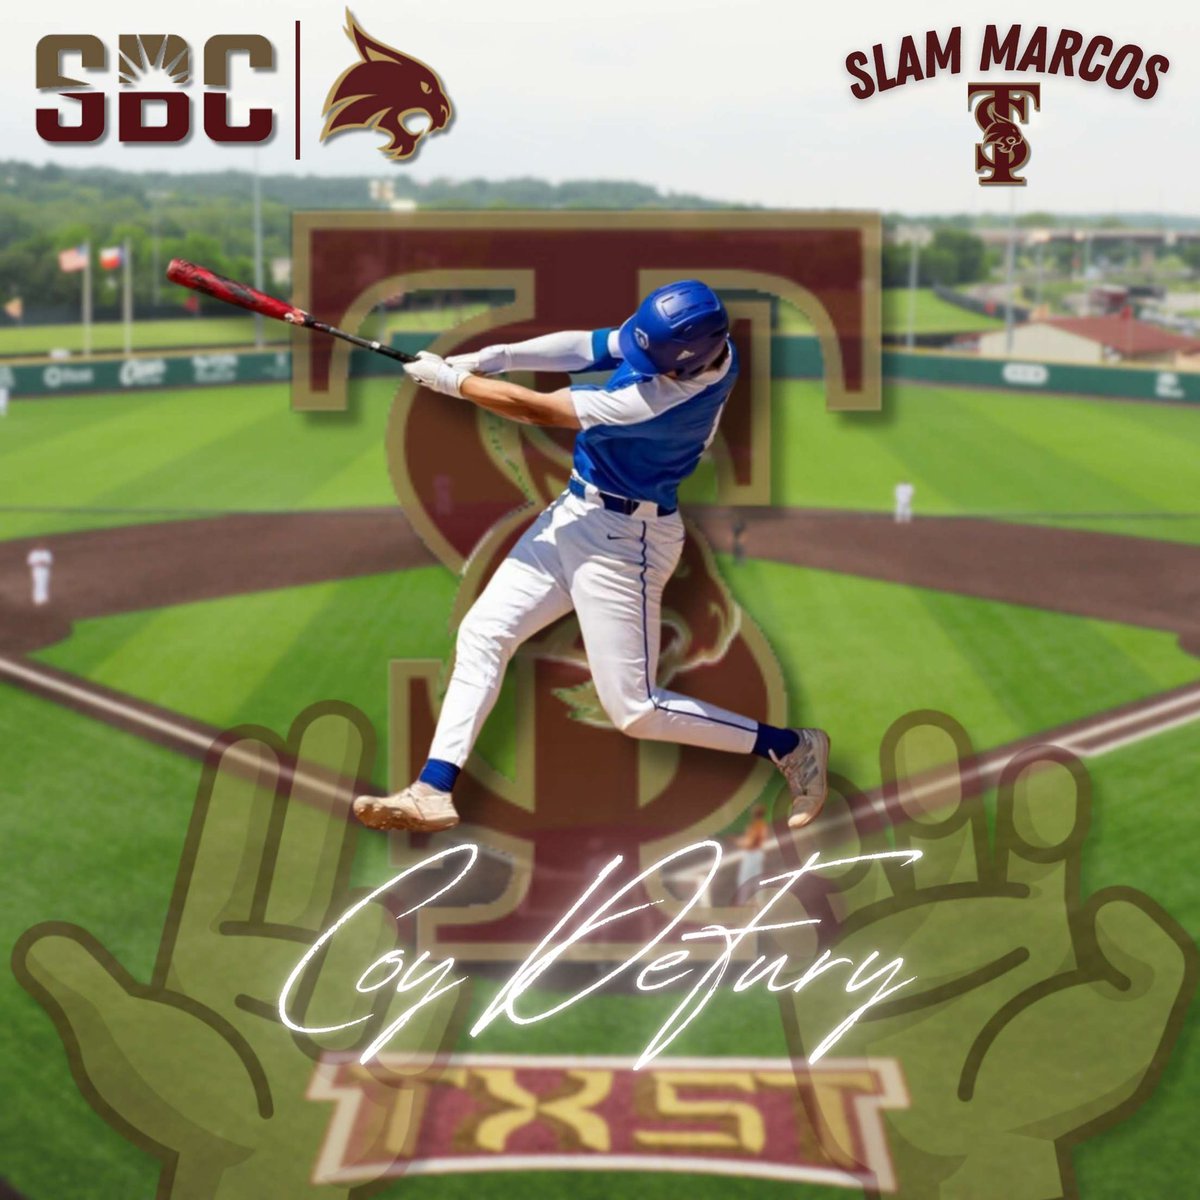 I am excited to announce I am taking my talents to @TxStateBaseball I would like to thank God for blessing me, My family for their love & support, All the coaches who believed in me, All current & past teammates, and all my friends who love & support me. #EatEmUp #SlamMarcos